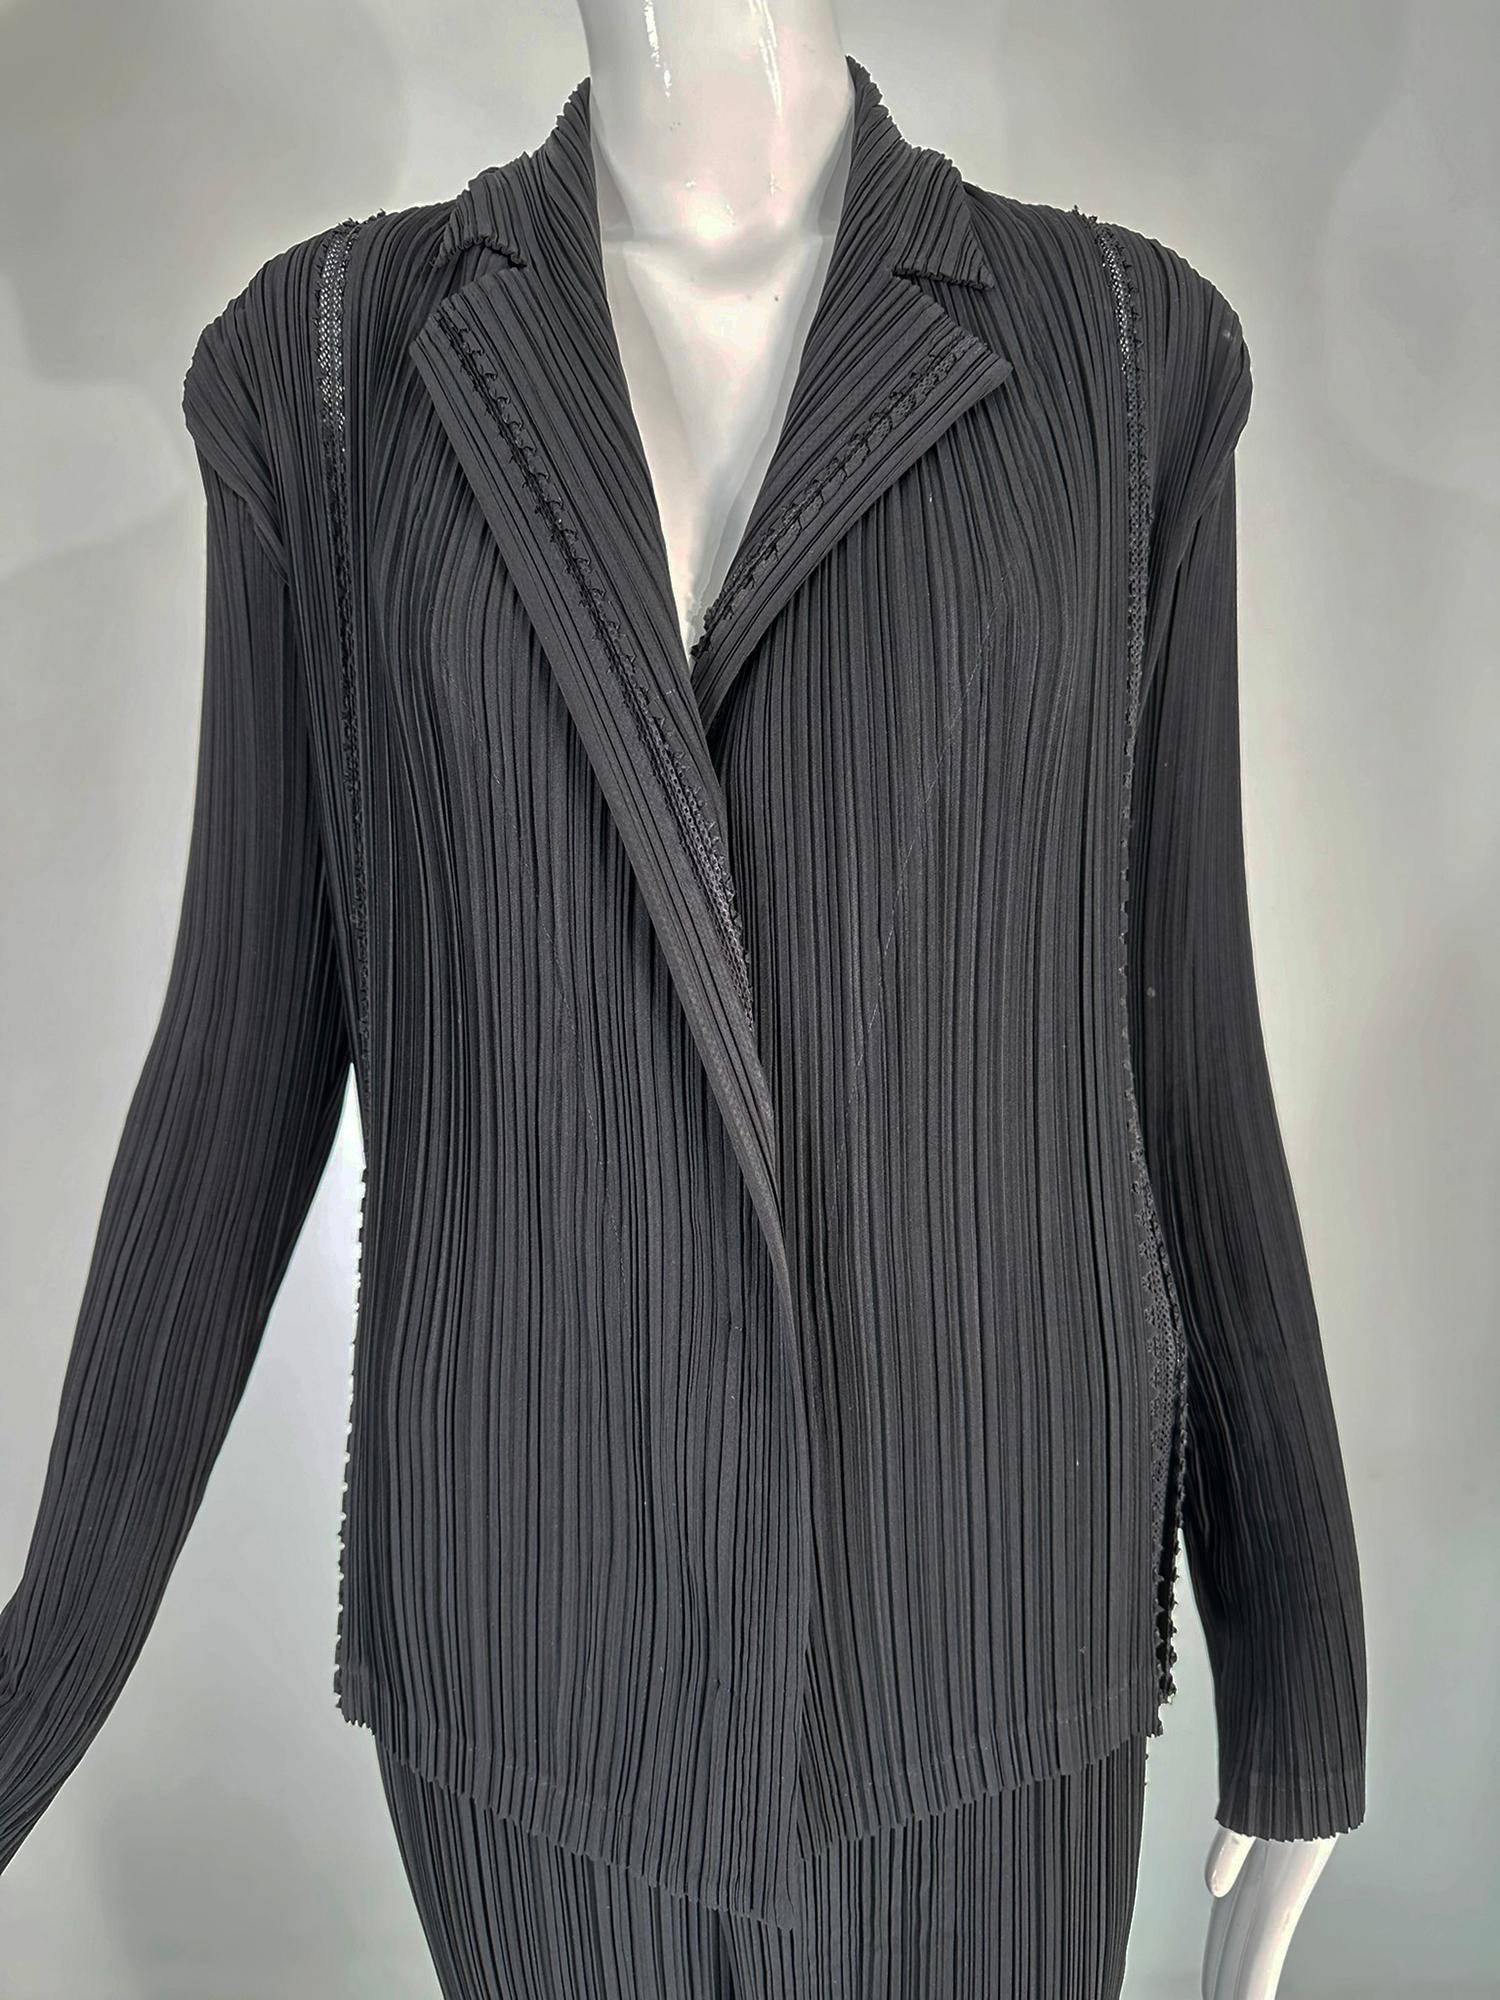 Issey Miyake Fete 2pc jacket & pant set, black pleats with open mesh insertion. Long sleeves hidden button closure jacket with notched lapel collar, open work mesh at seams throughout. Matching pant with elastic waist, full leg and open work mesh at